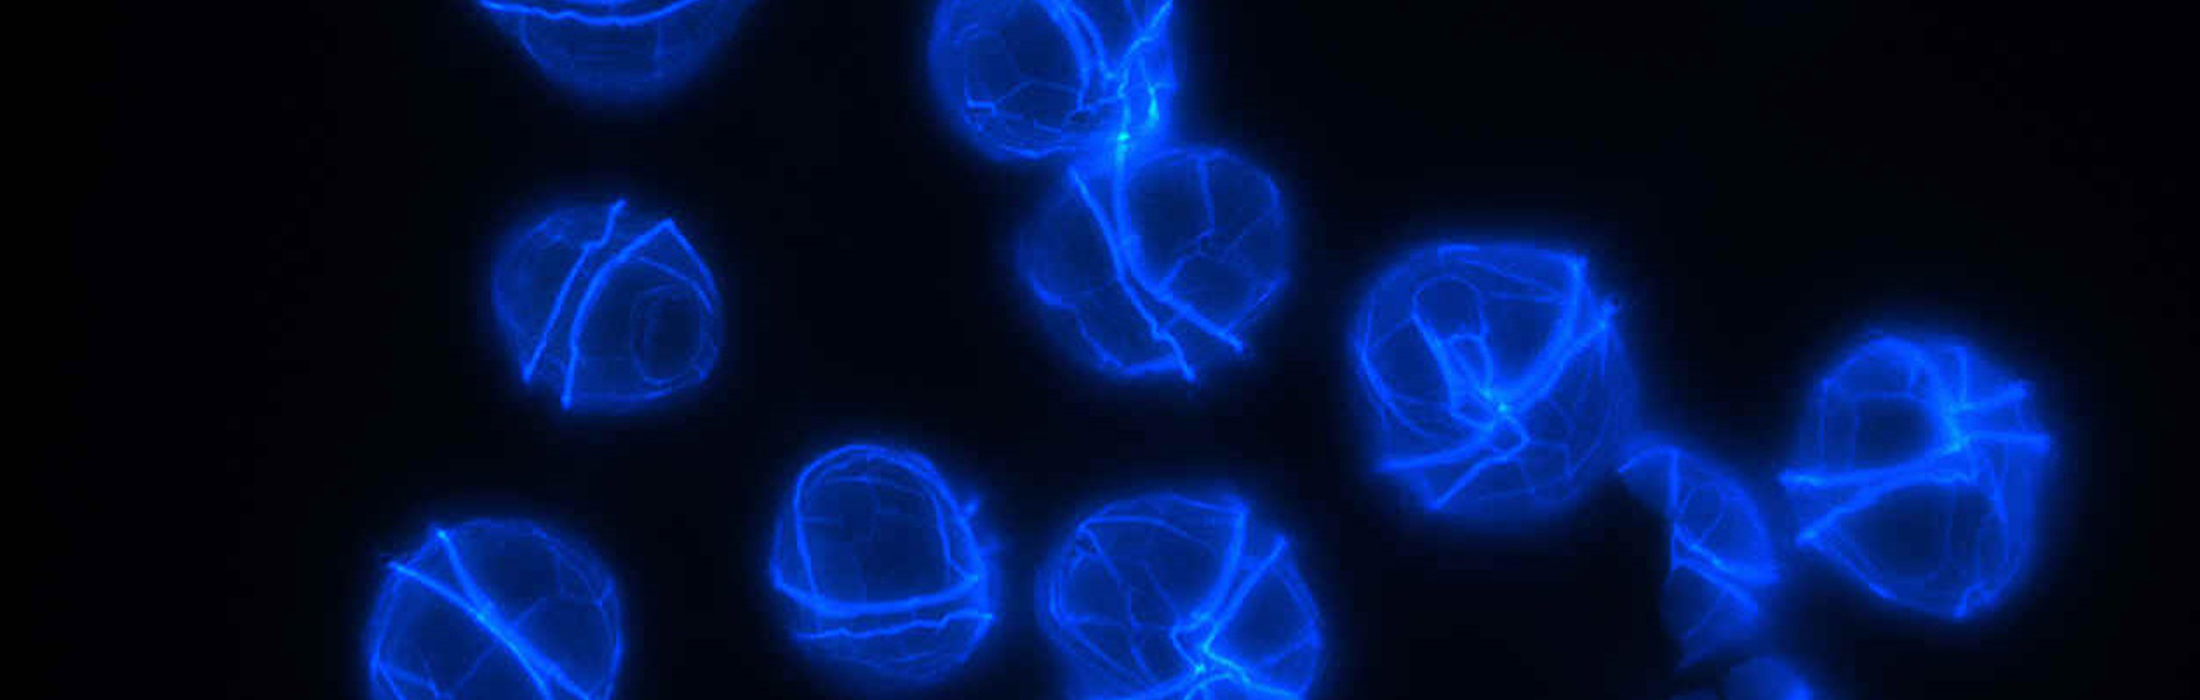 Calcafluor stained Alexandrium catenella, viewed under fluorescence. Photo by G. Usup 